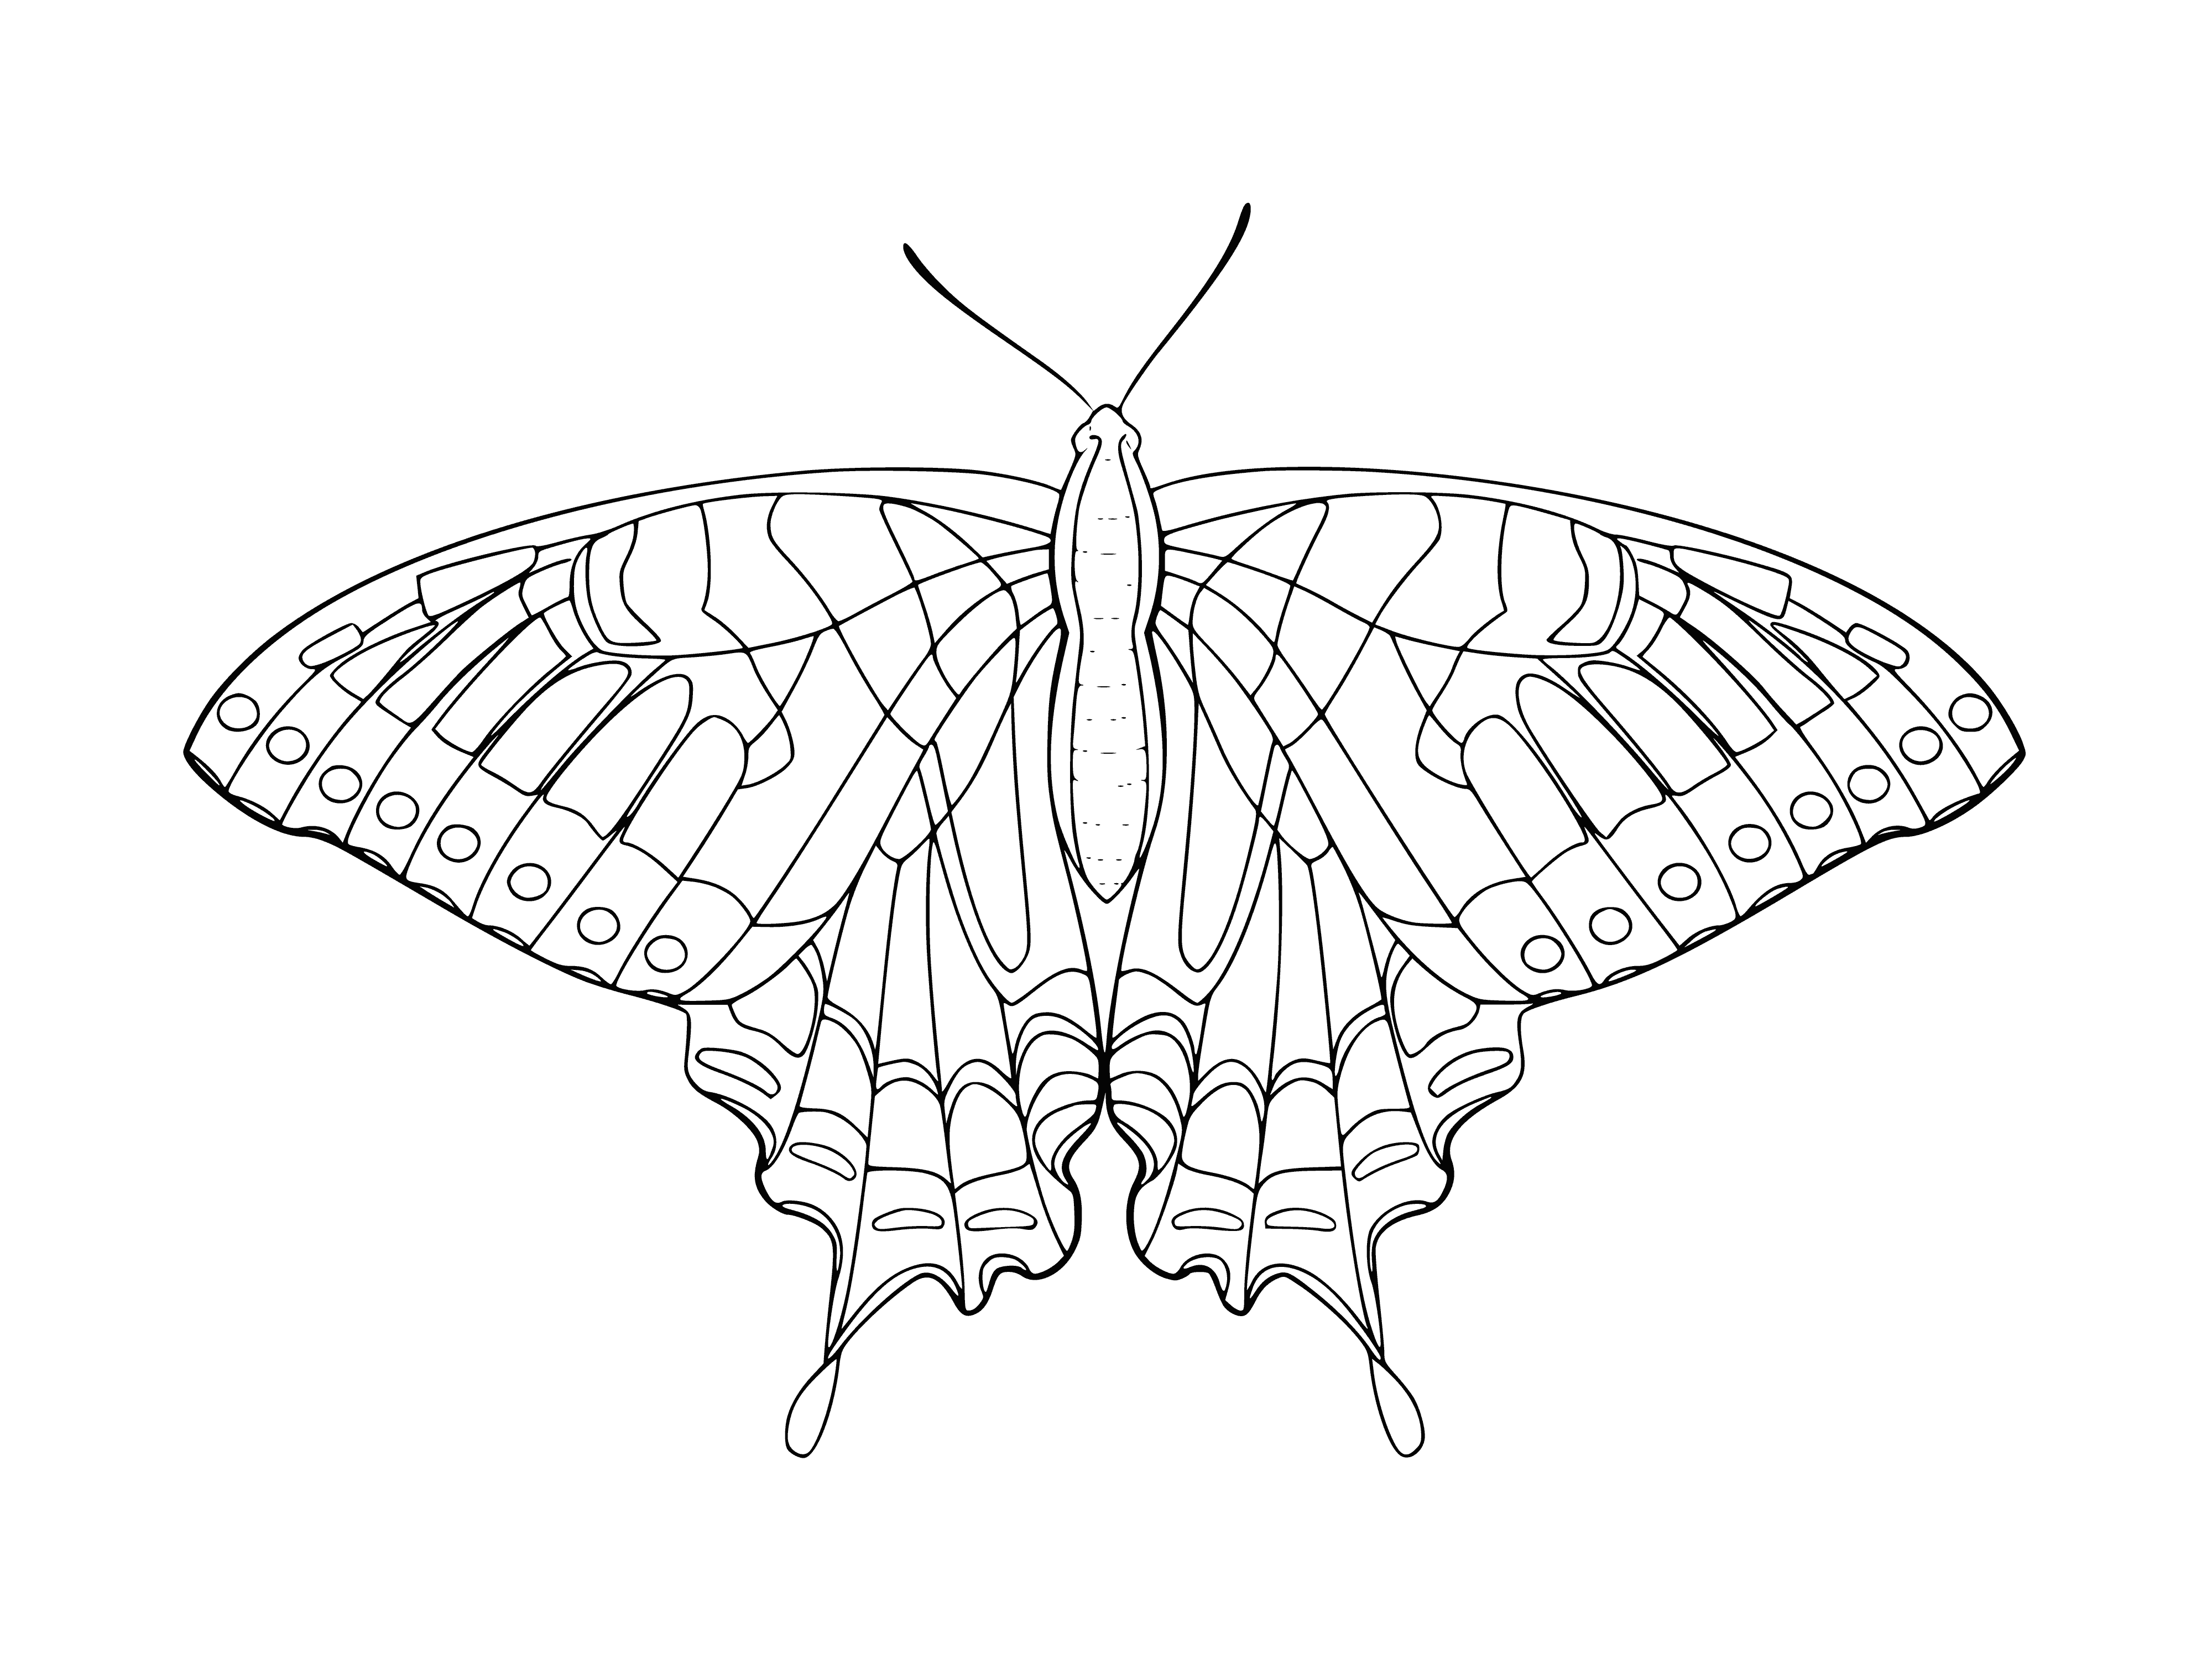 coloring page: Beautiful orange butterfly with black spots is flying near flowers, wings wide and body long.